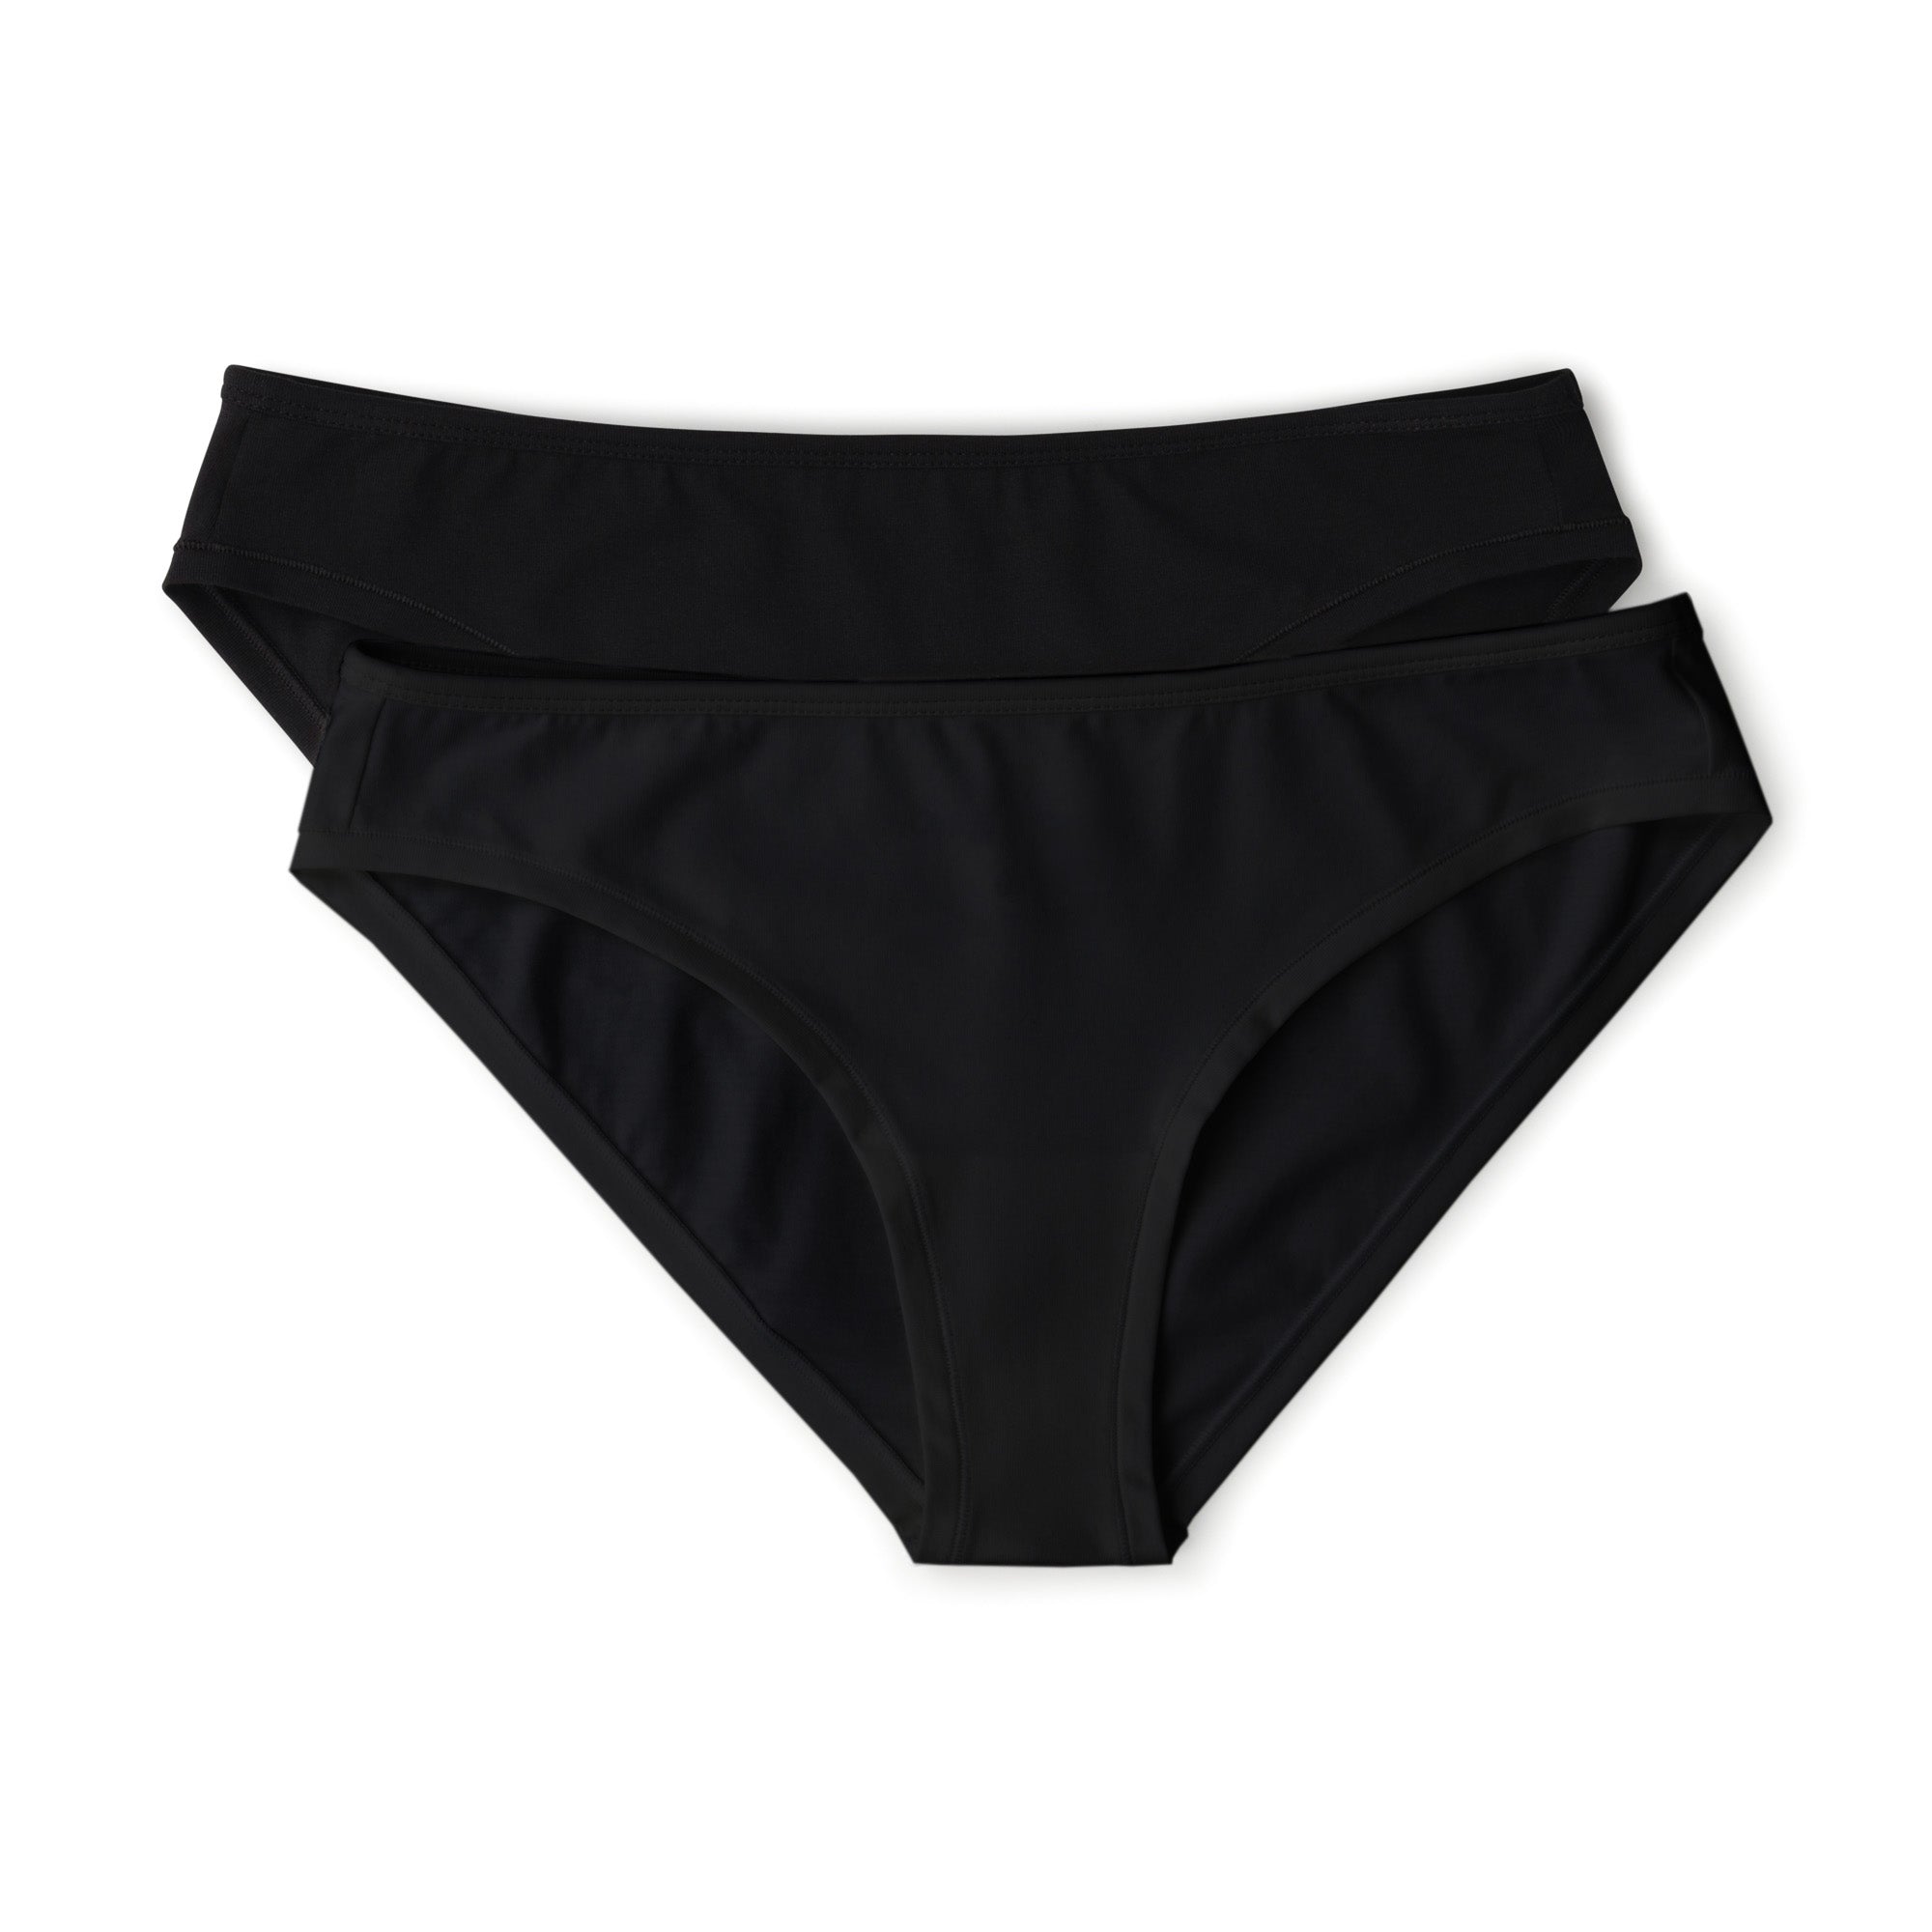 ladies briefs black organic cotton biodegradable recycled multipack